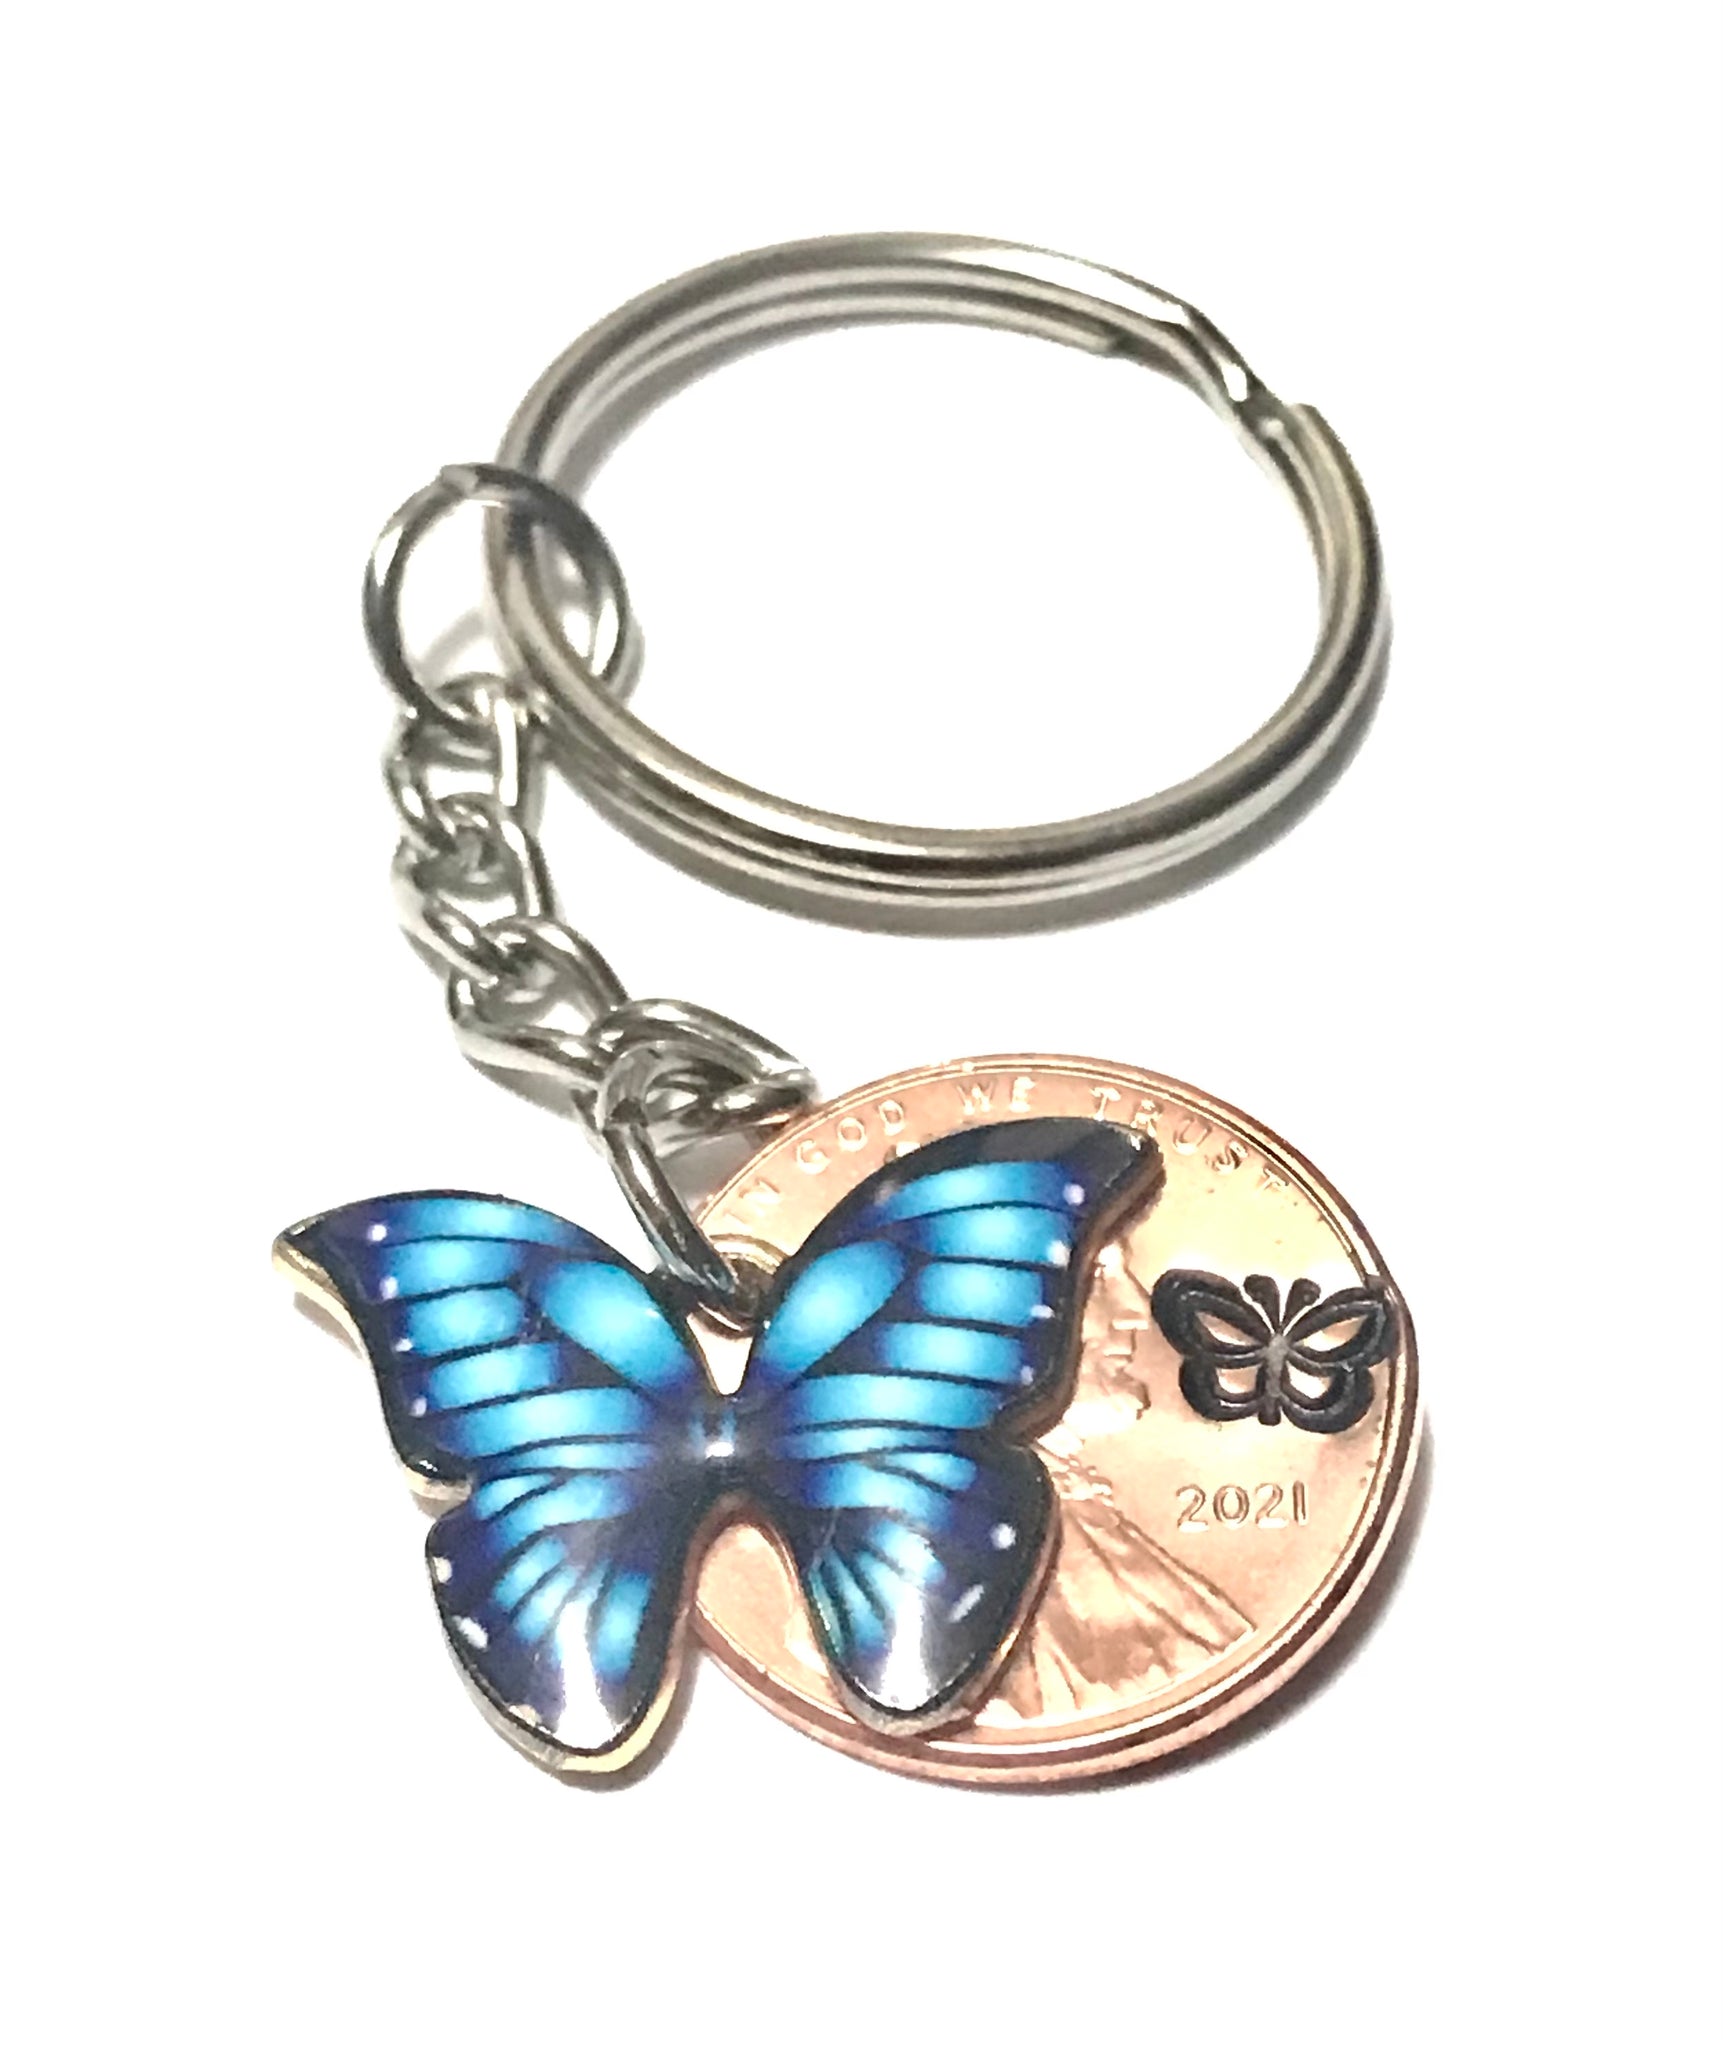 Blue Monarch Butterfly sized beside a Lincoln Cent  showing the hand stamp butterfly engraving above the date.